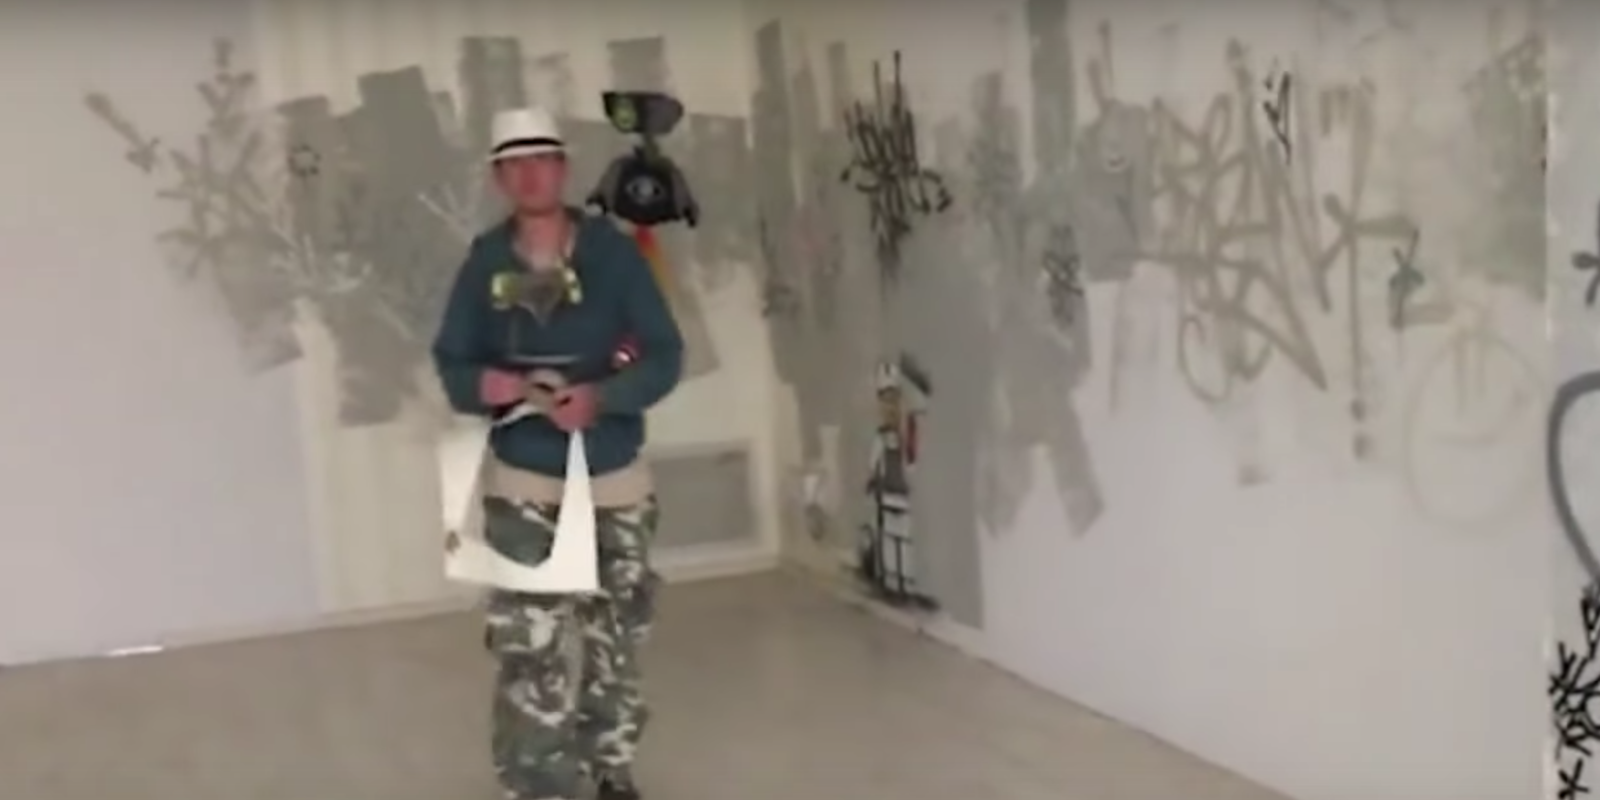 A woman claims to have filmed Banksy in a mall in Israel